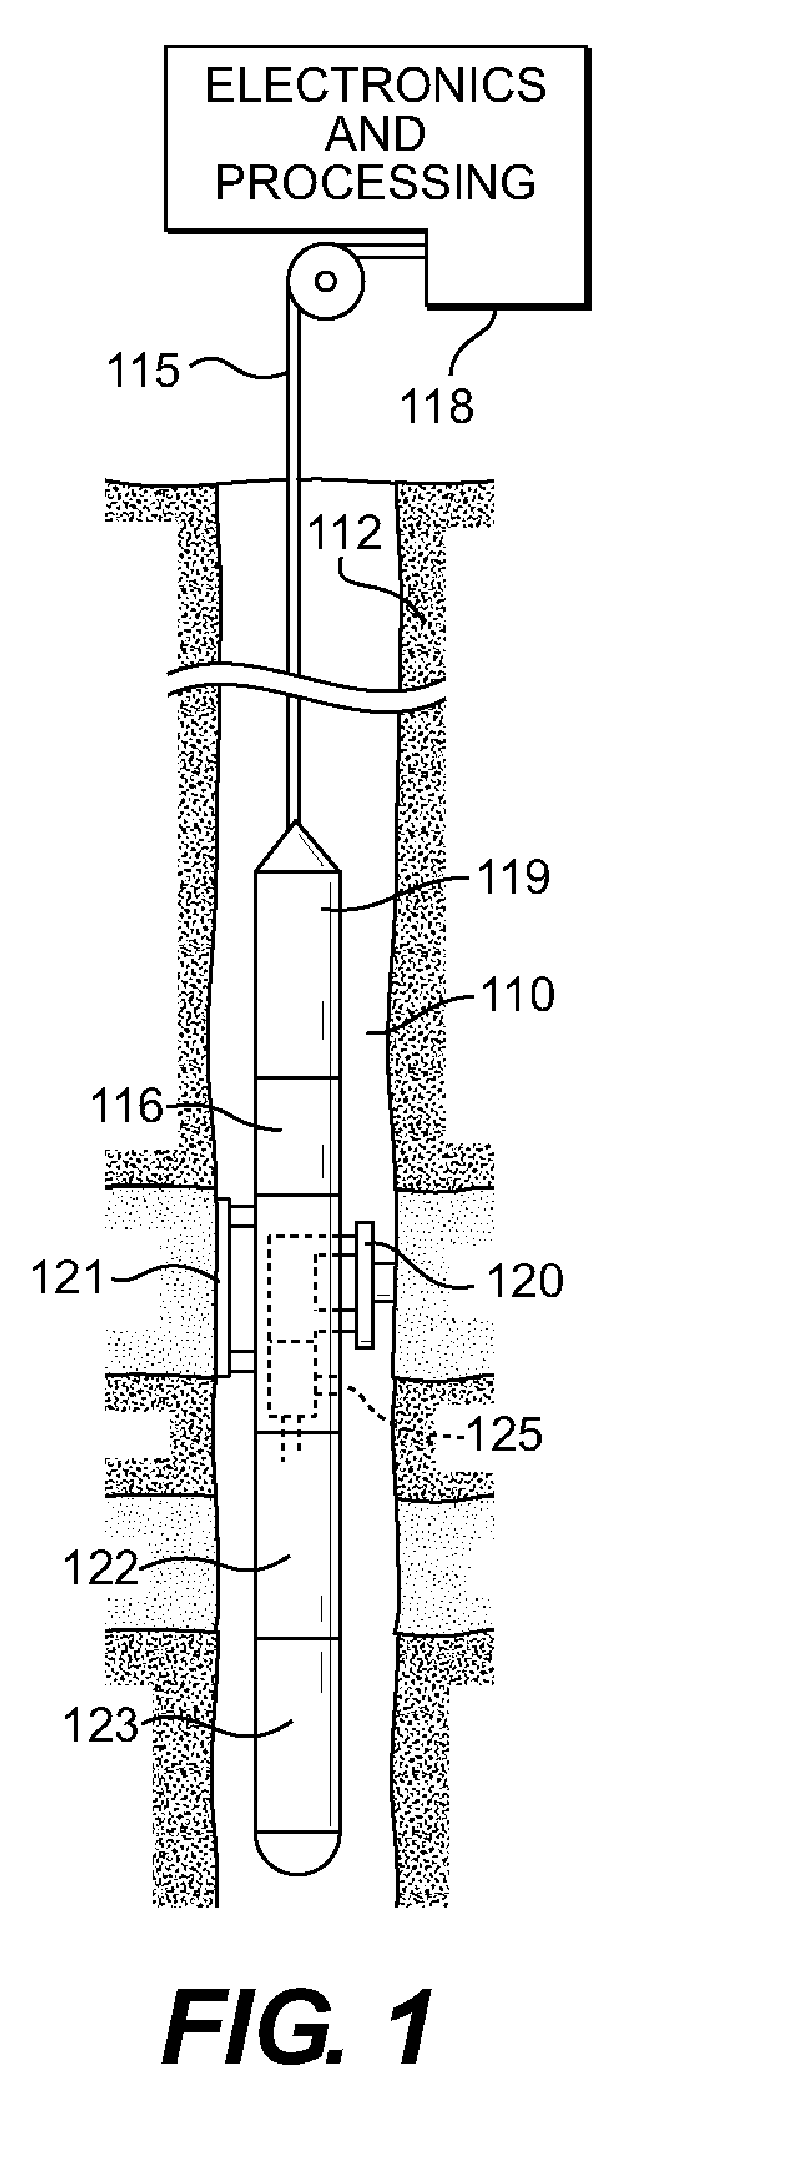 Method and Apparatus for Downhole Spectral Analysis of Fluids